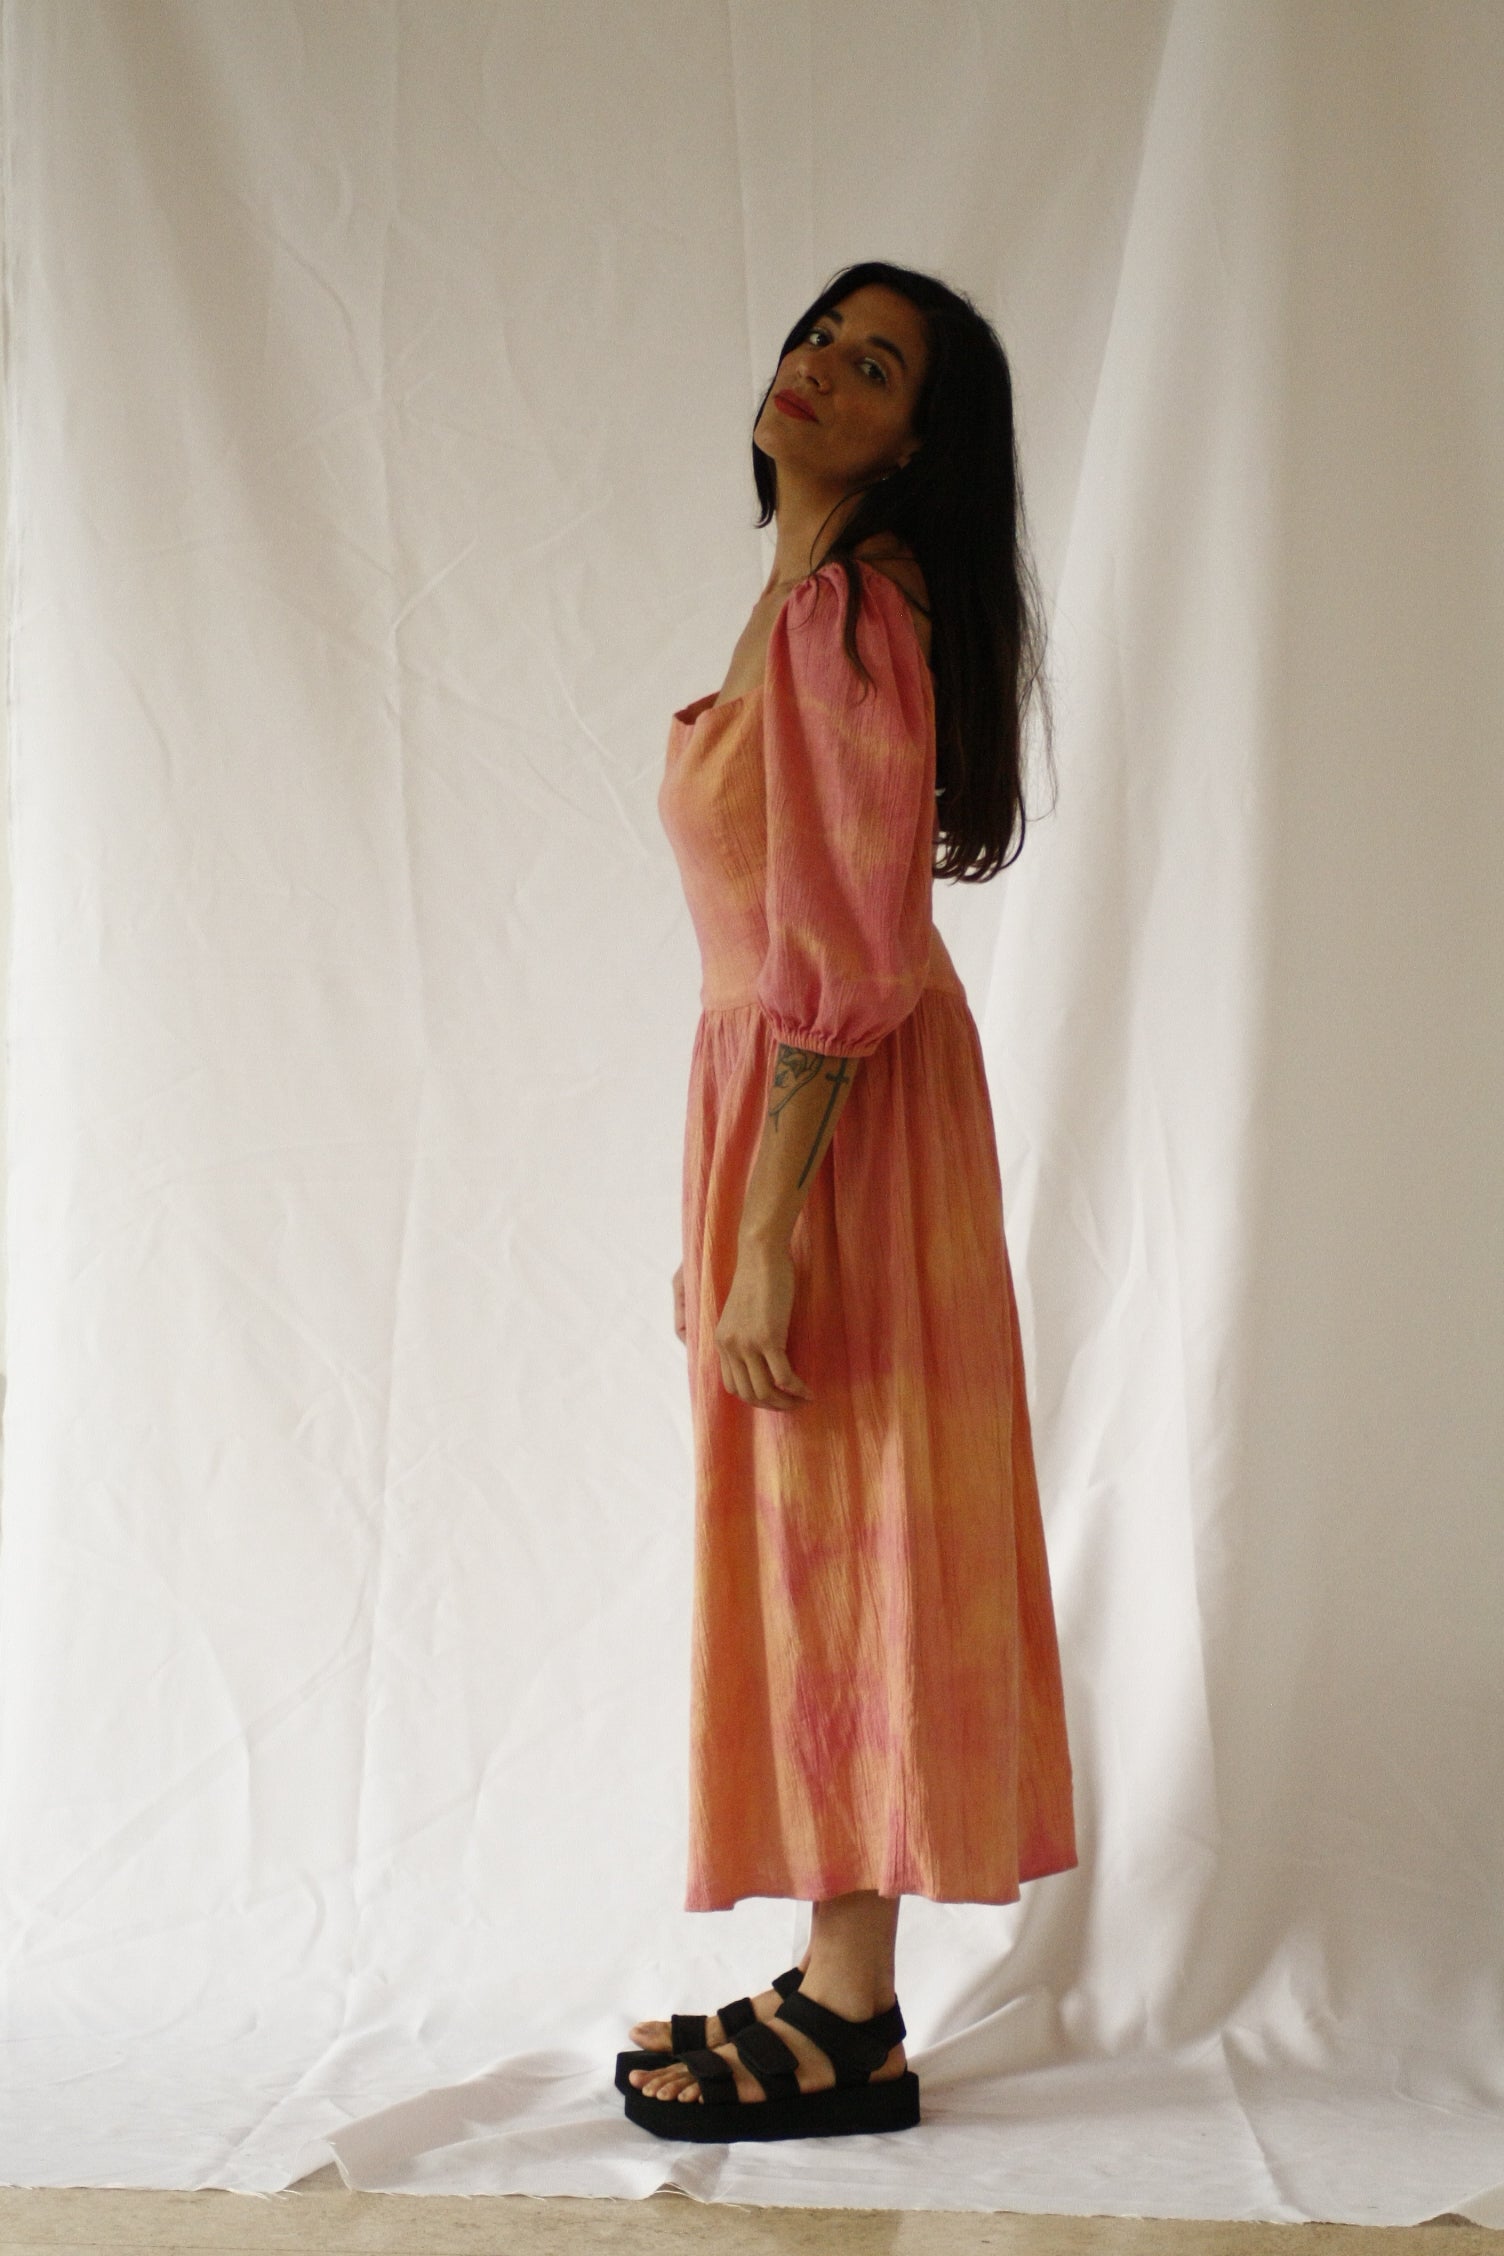 The design was inspired by the street style, art and architecture of Japan. This dress is naturally dyed with turmeric, achiote and cochineal to resemble the colorful japanese rice cake, mochi. INGREDIENTS 100% cotton Turmeric, achiote and cochineal IMPORTANT Natural dyes don't contain harmful chemicals, they are biodegradable, nontoxic and nonallergic. The color can slightly vary with each batch. Ethically made in Ecuador. Sustainable fashion, handmade